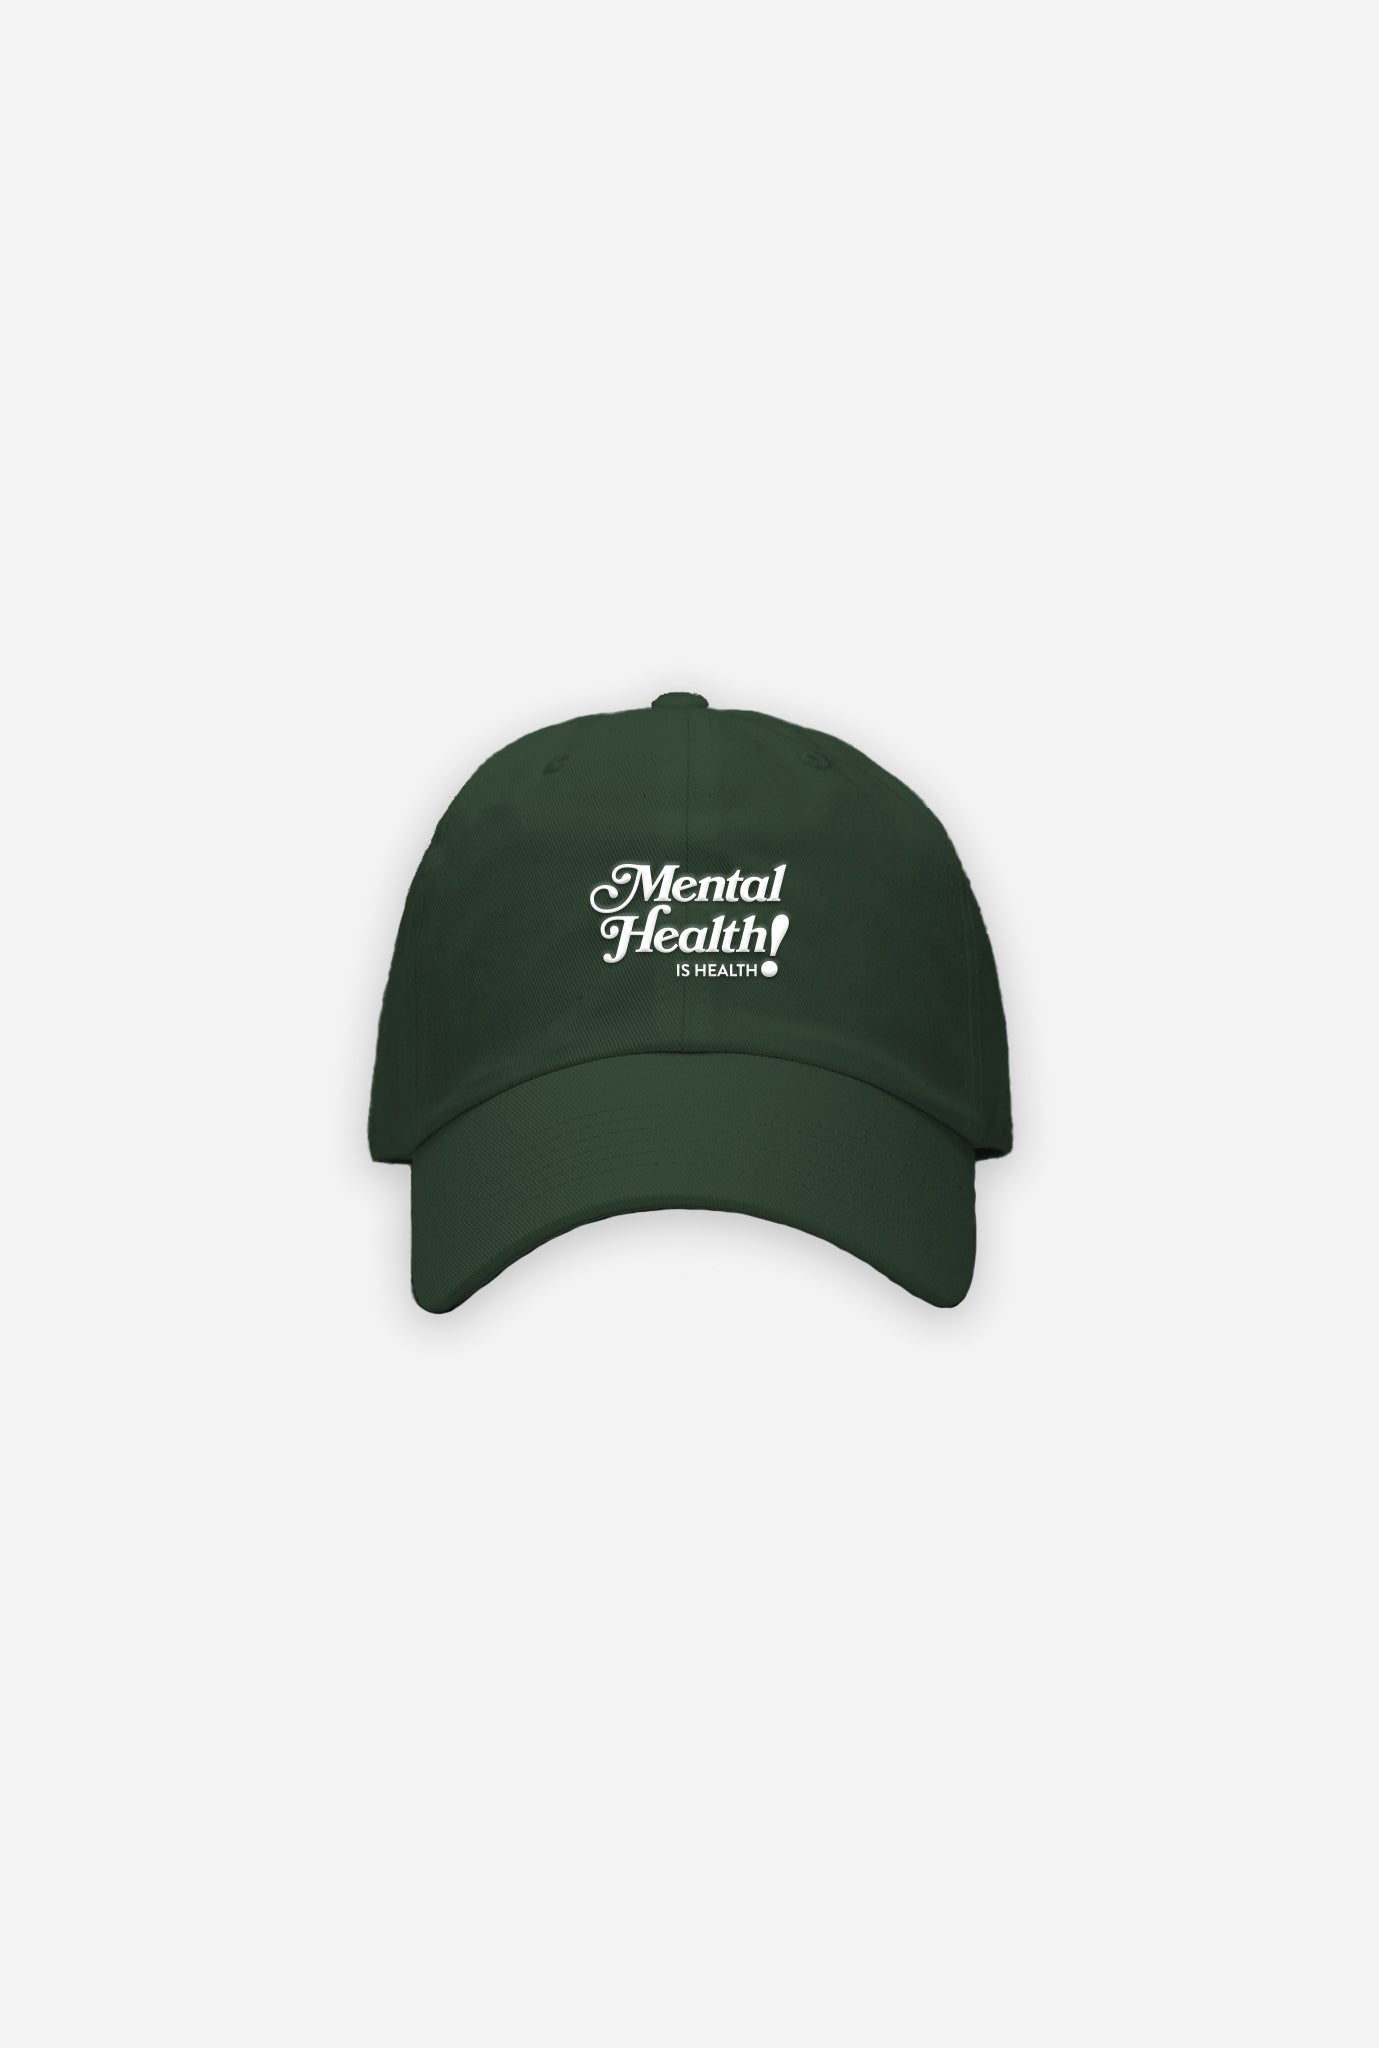 Mental Health is Health! Dad Cap - Forest Green